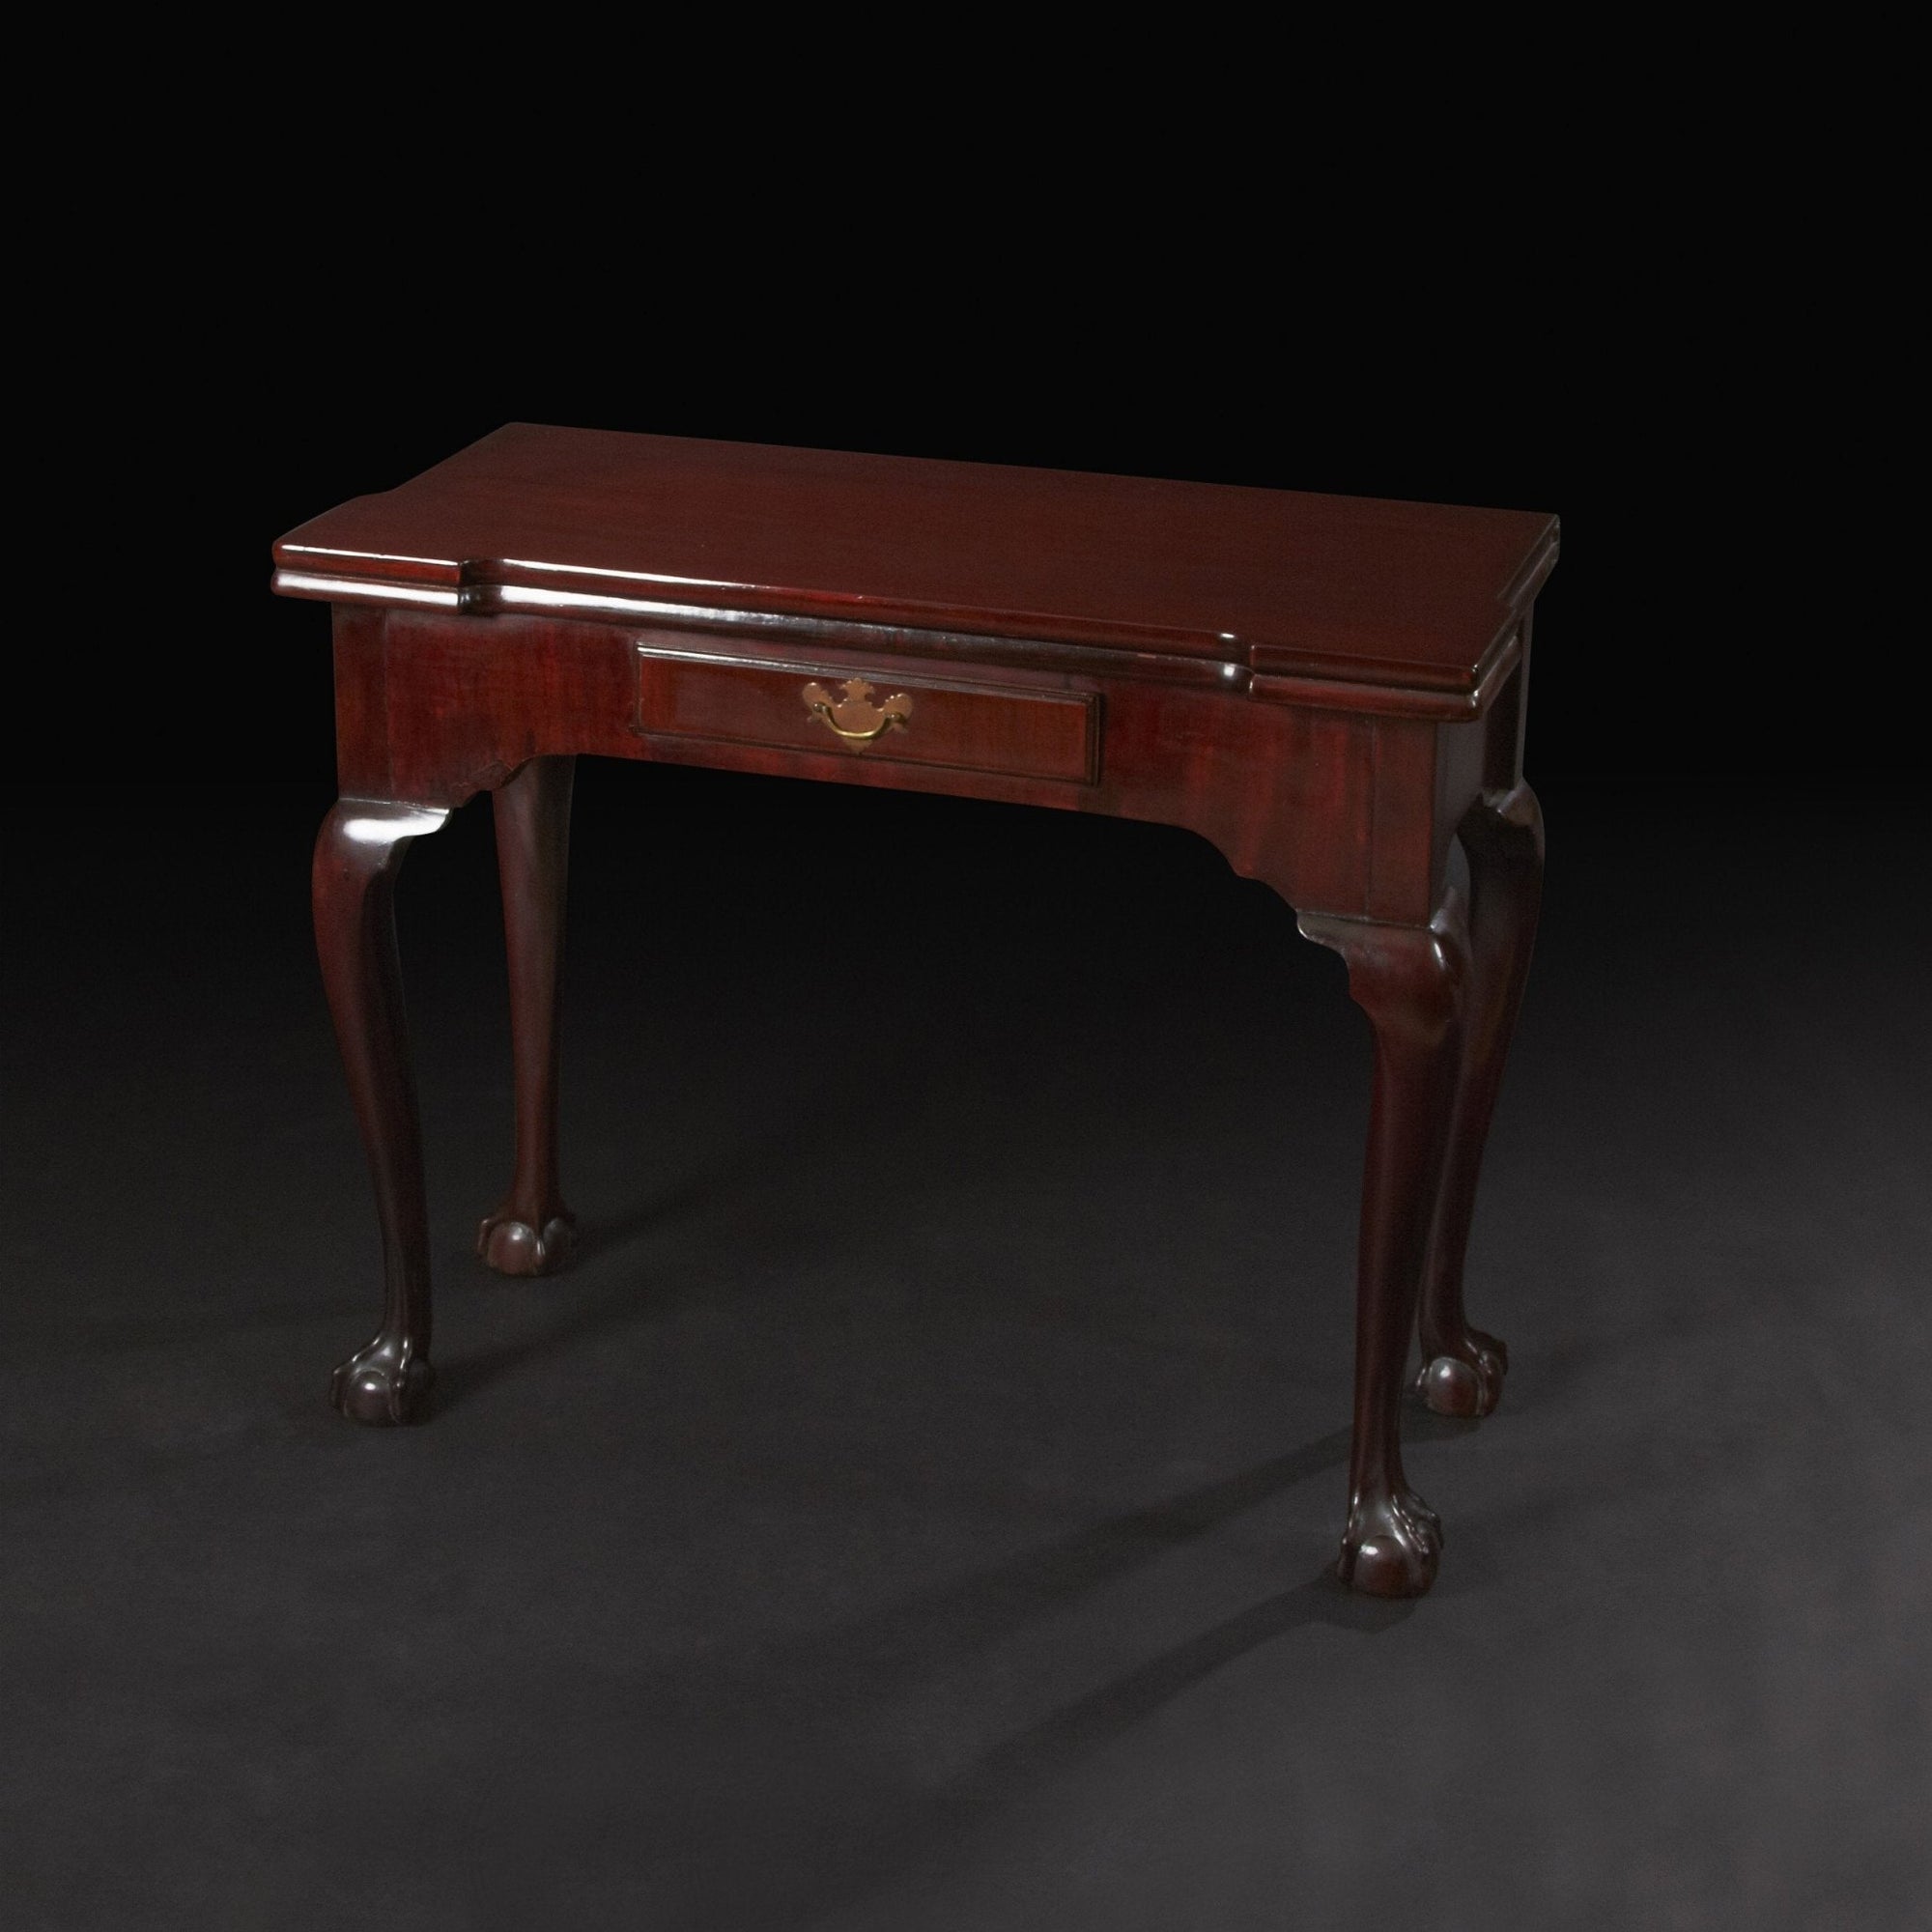 George II "Chippendale" Mahogany Ball and Claw Foot Card Table - English Georgian America